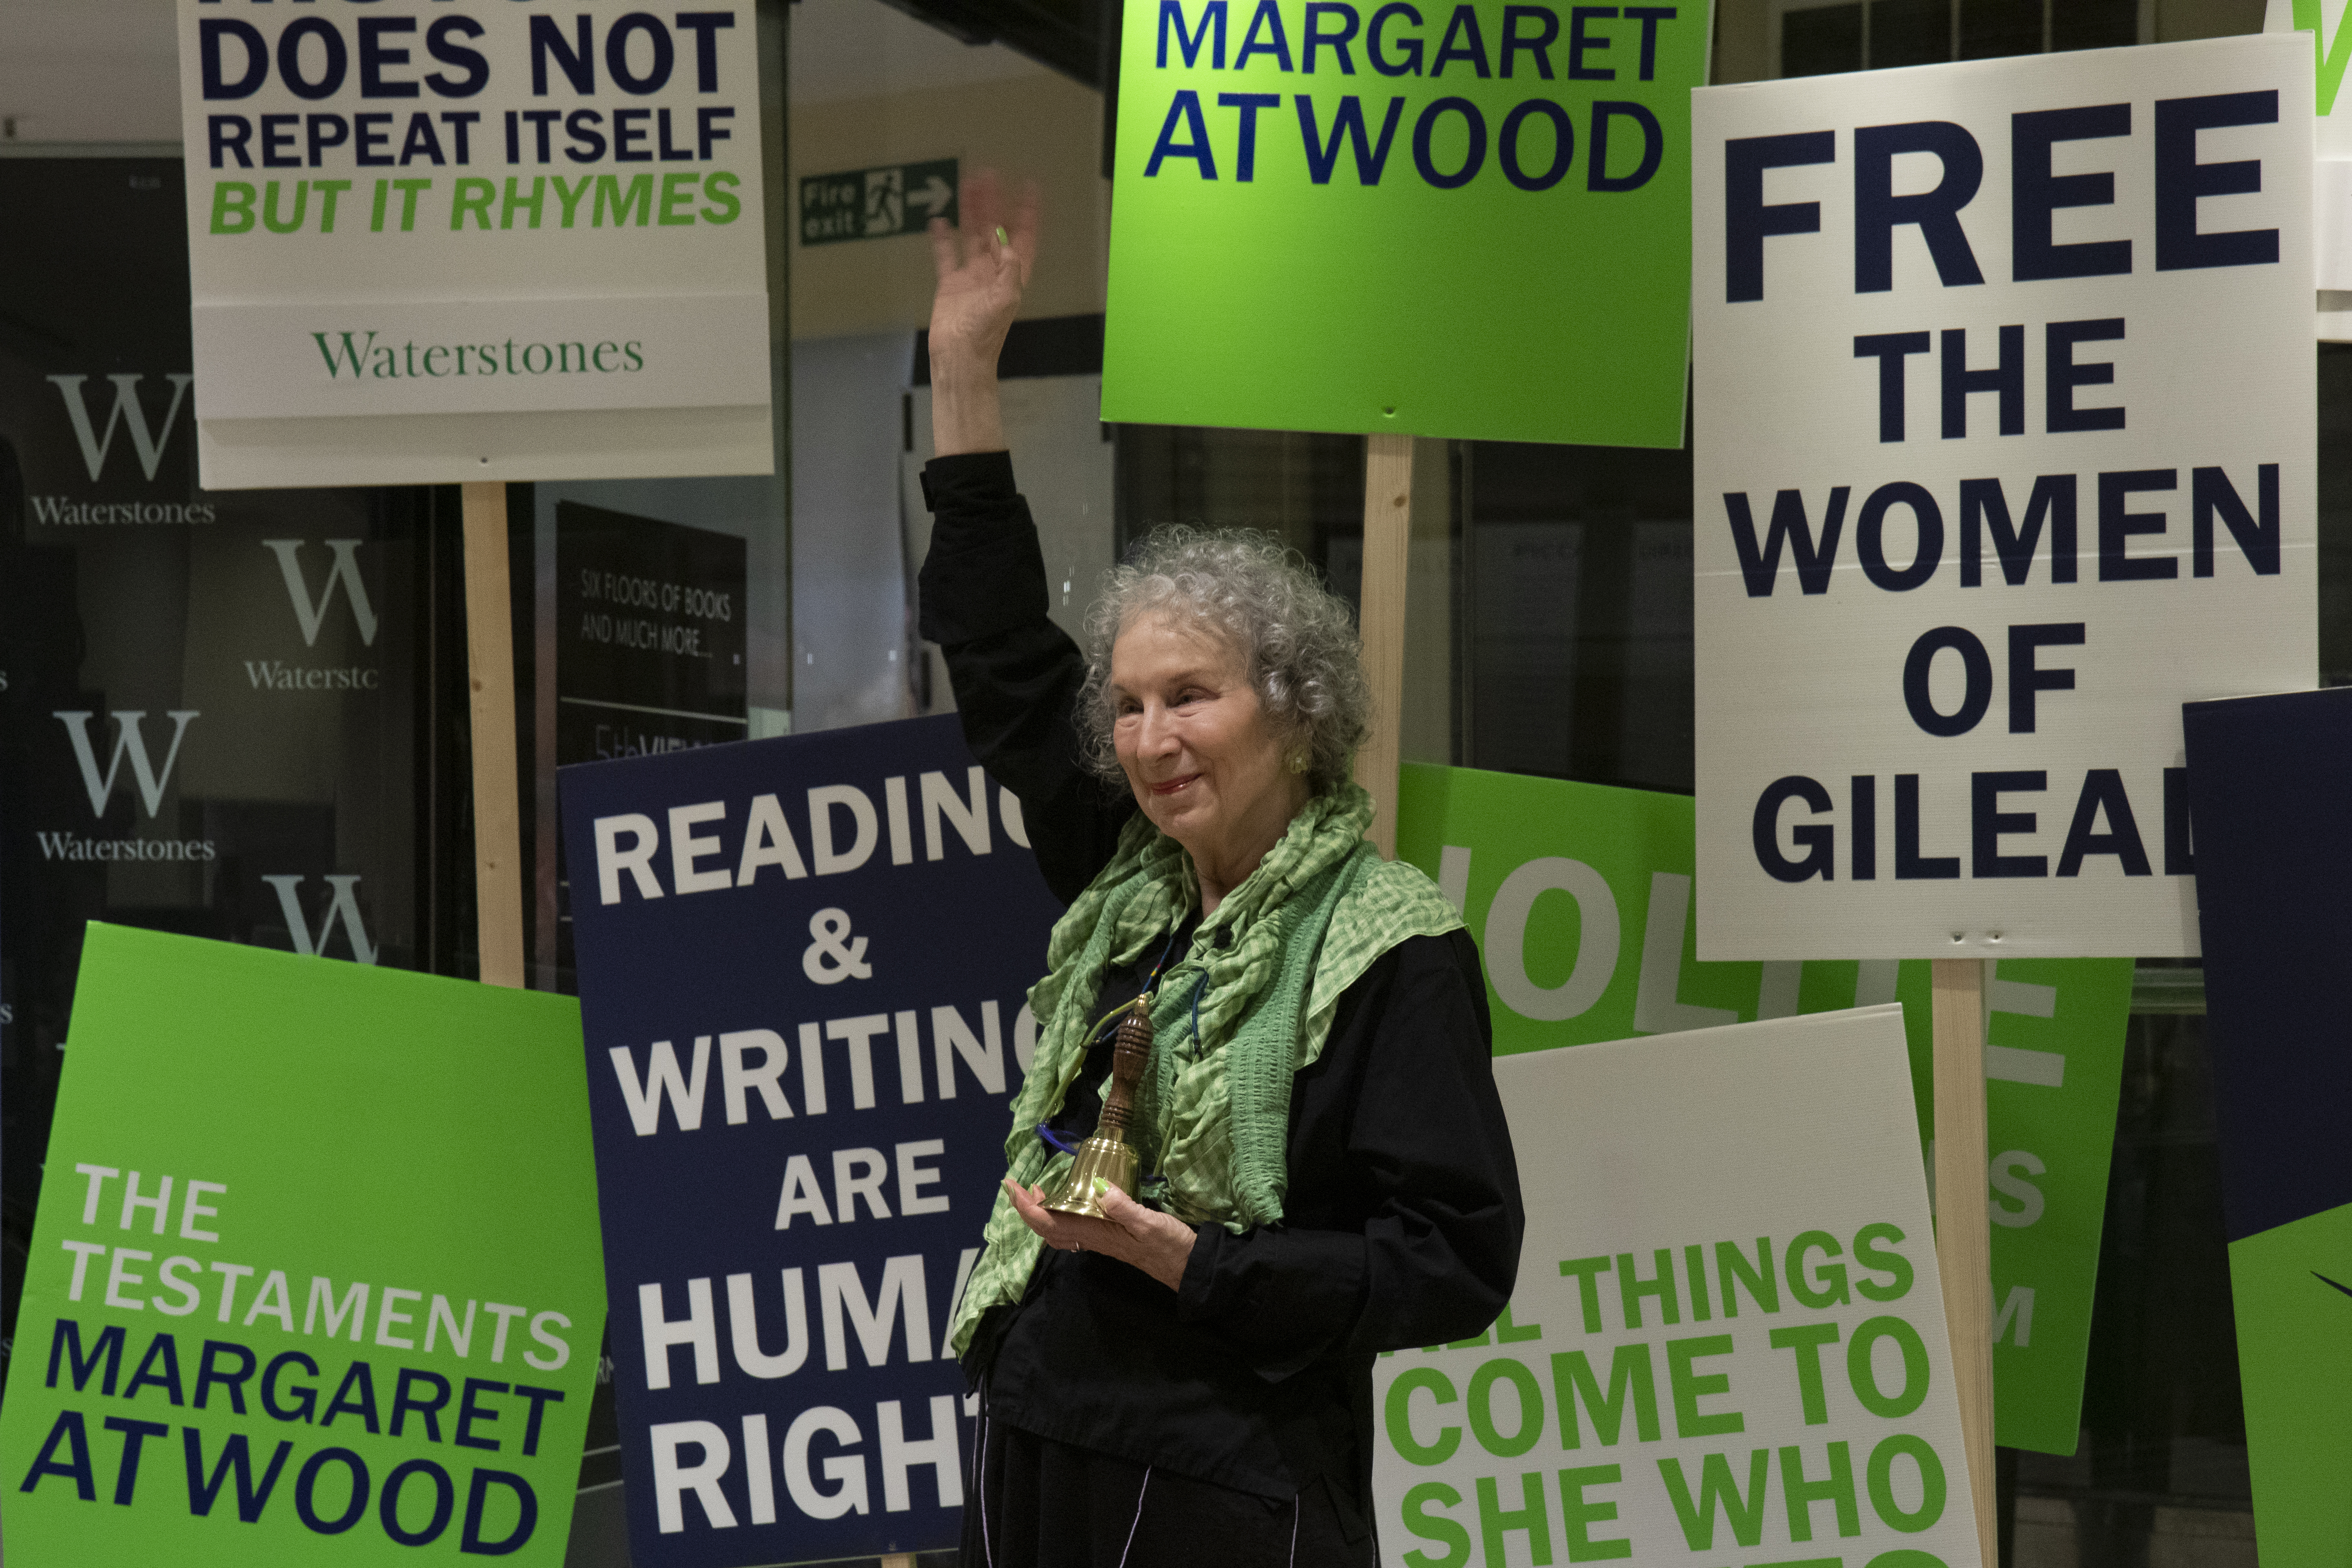 Margaret Atwood at the midnight launch at Waterstones Piccadilly